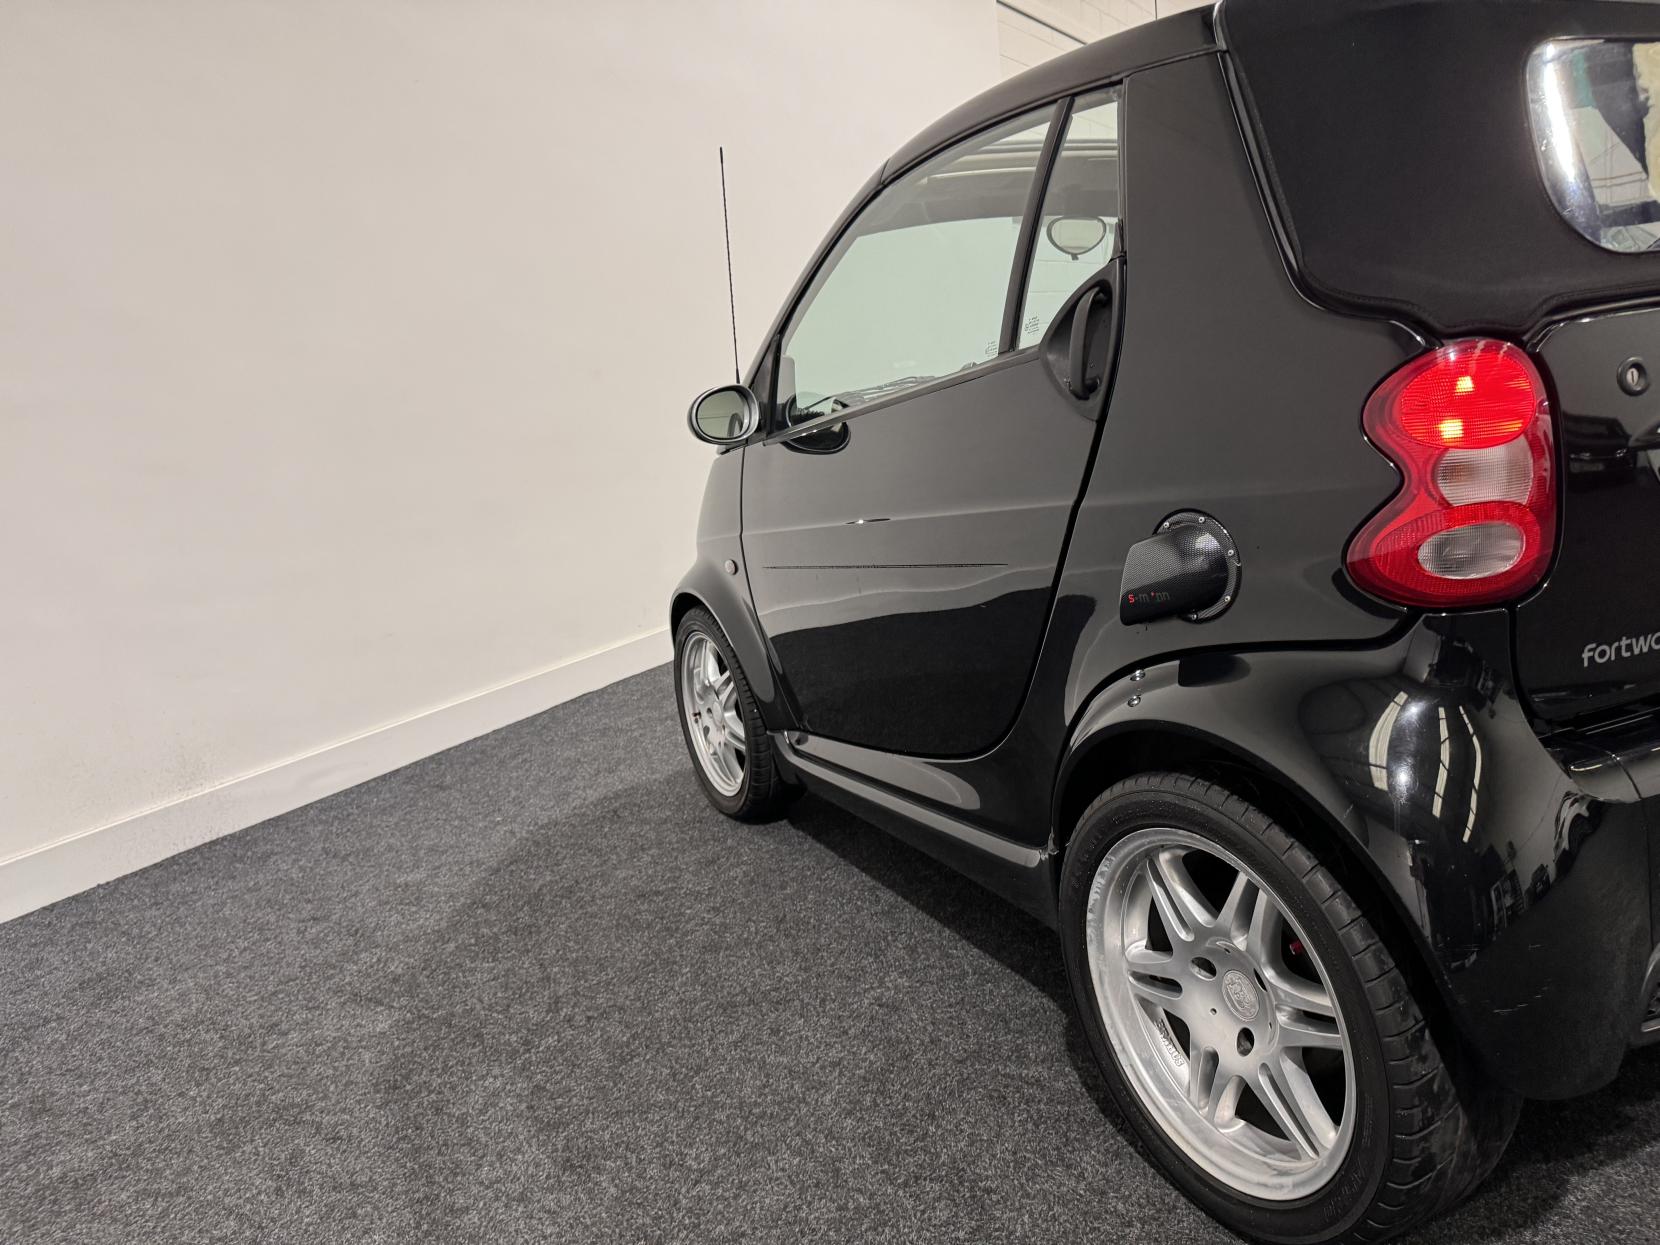 Smart fortwo 0.7 City BRABUS Cabriolet 2dr Petrol Automatic (127 g/km, 74 bhp)